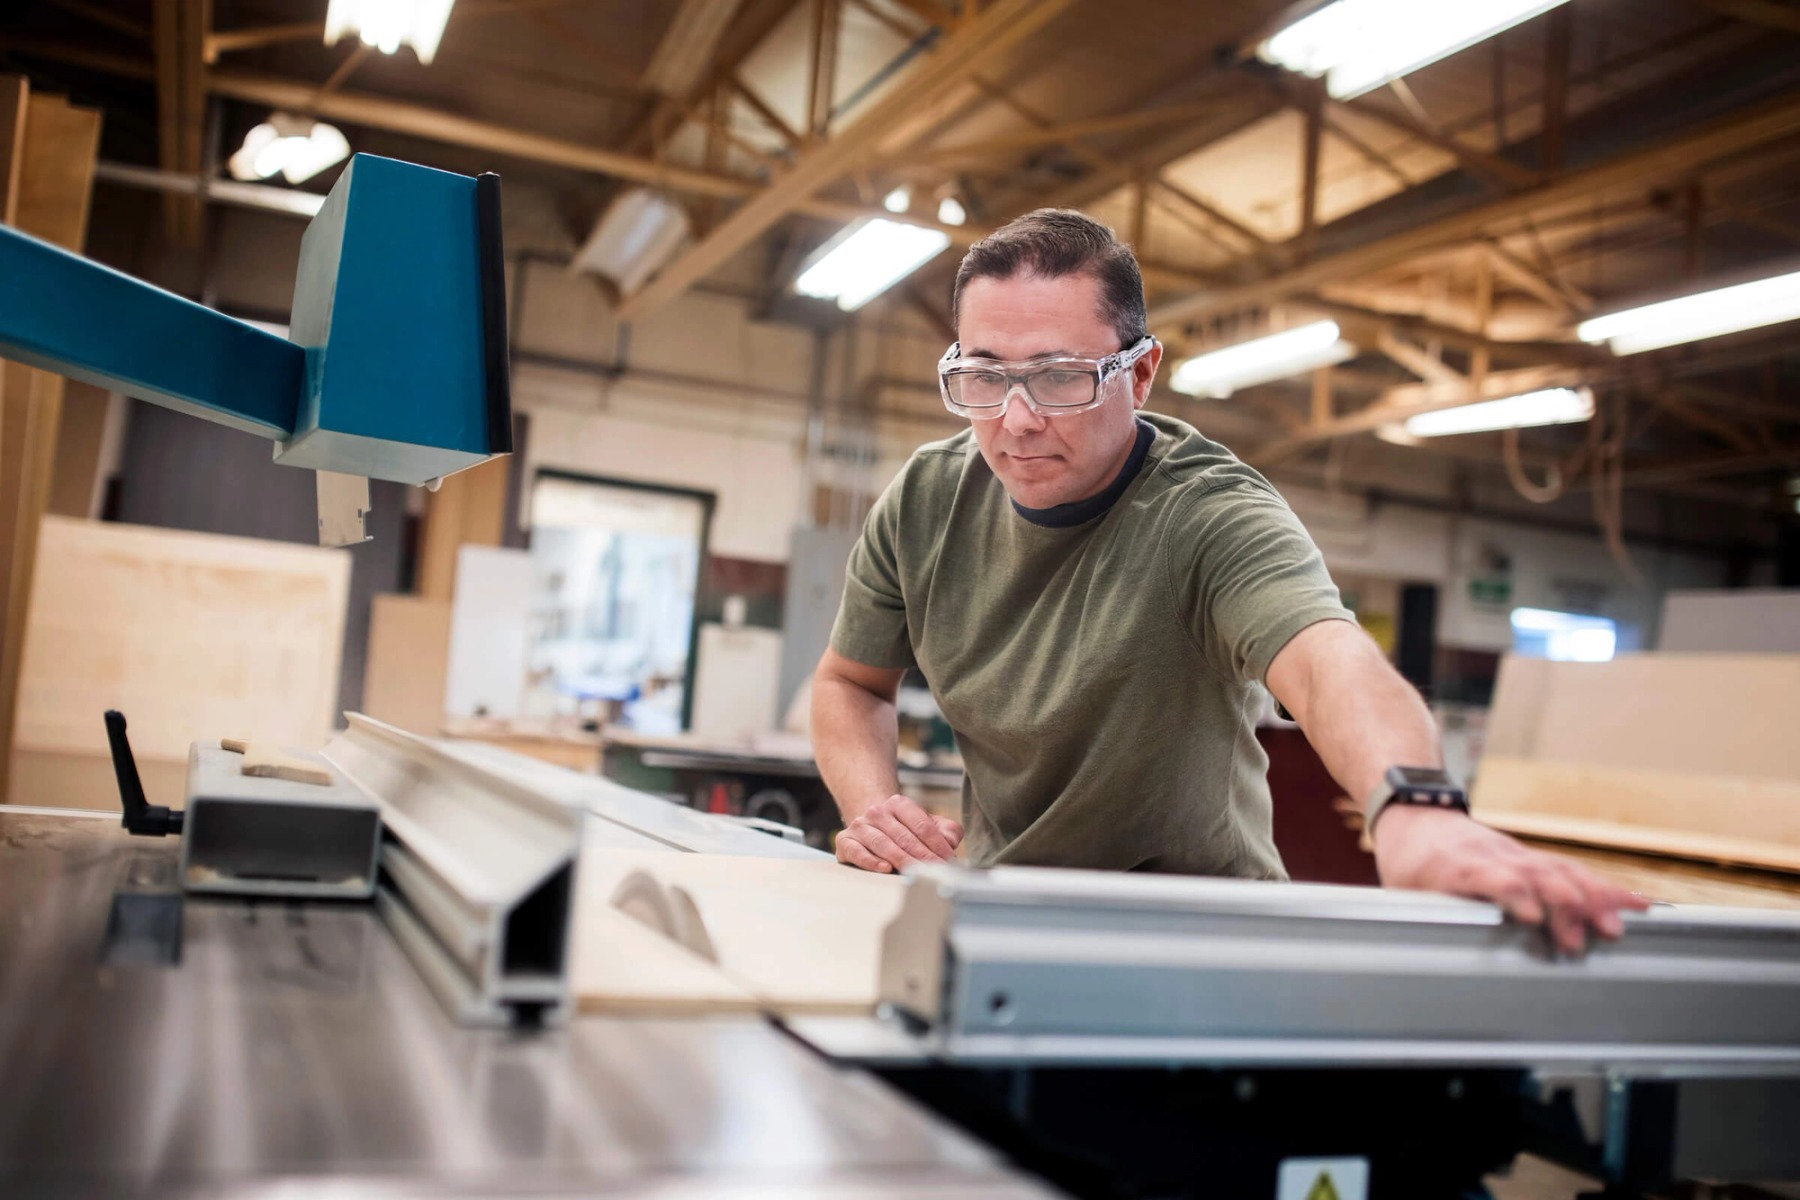 A man in a green shirt and safety goggles uses a large saw in a carpentry workshop.